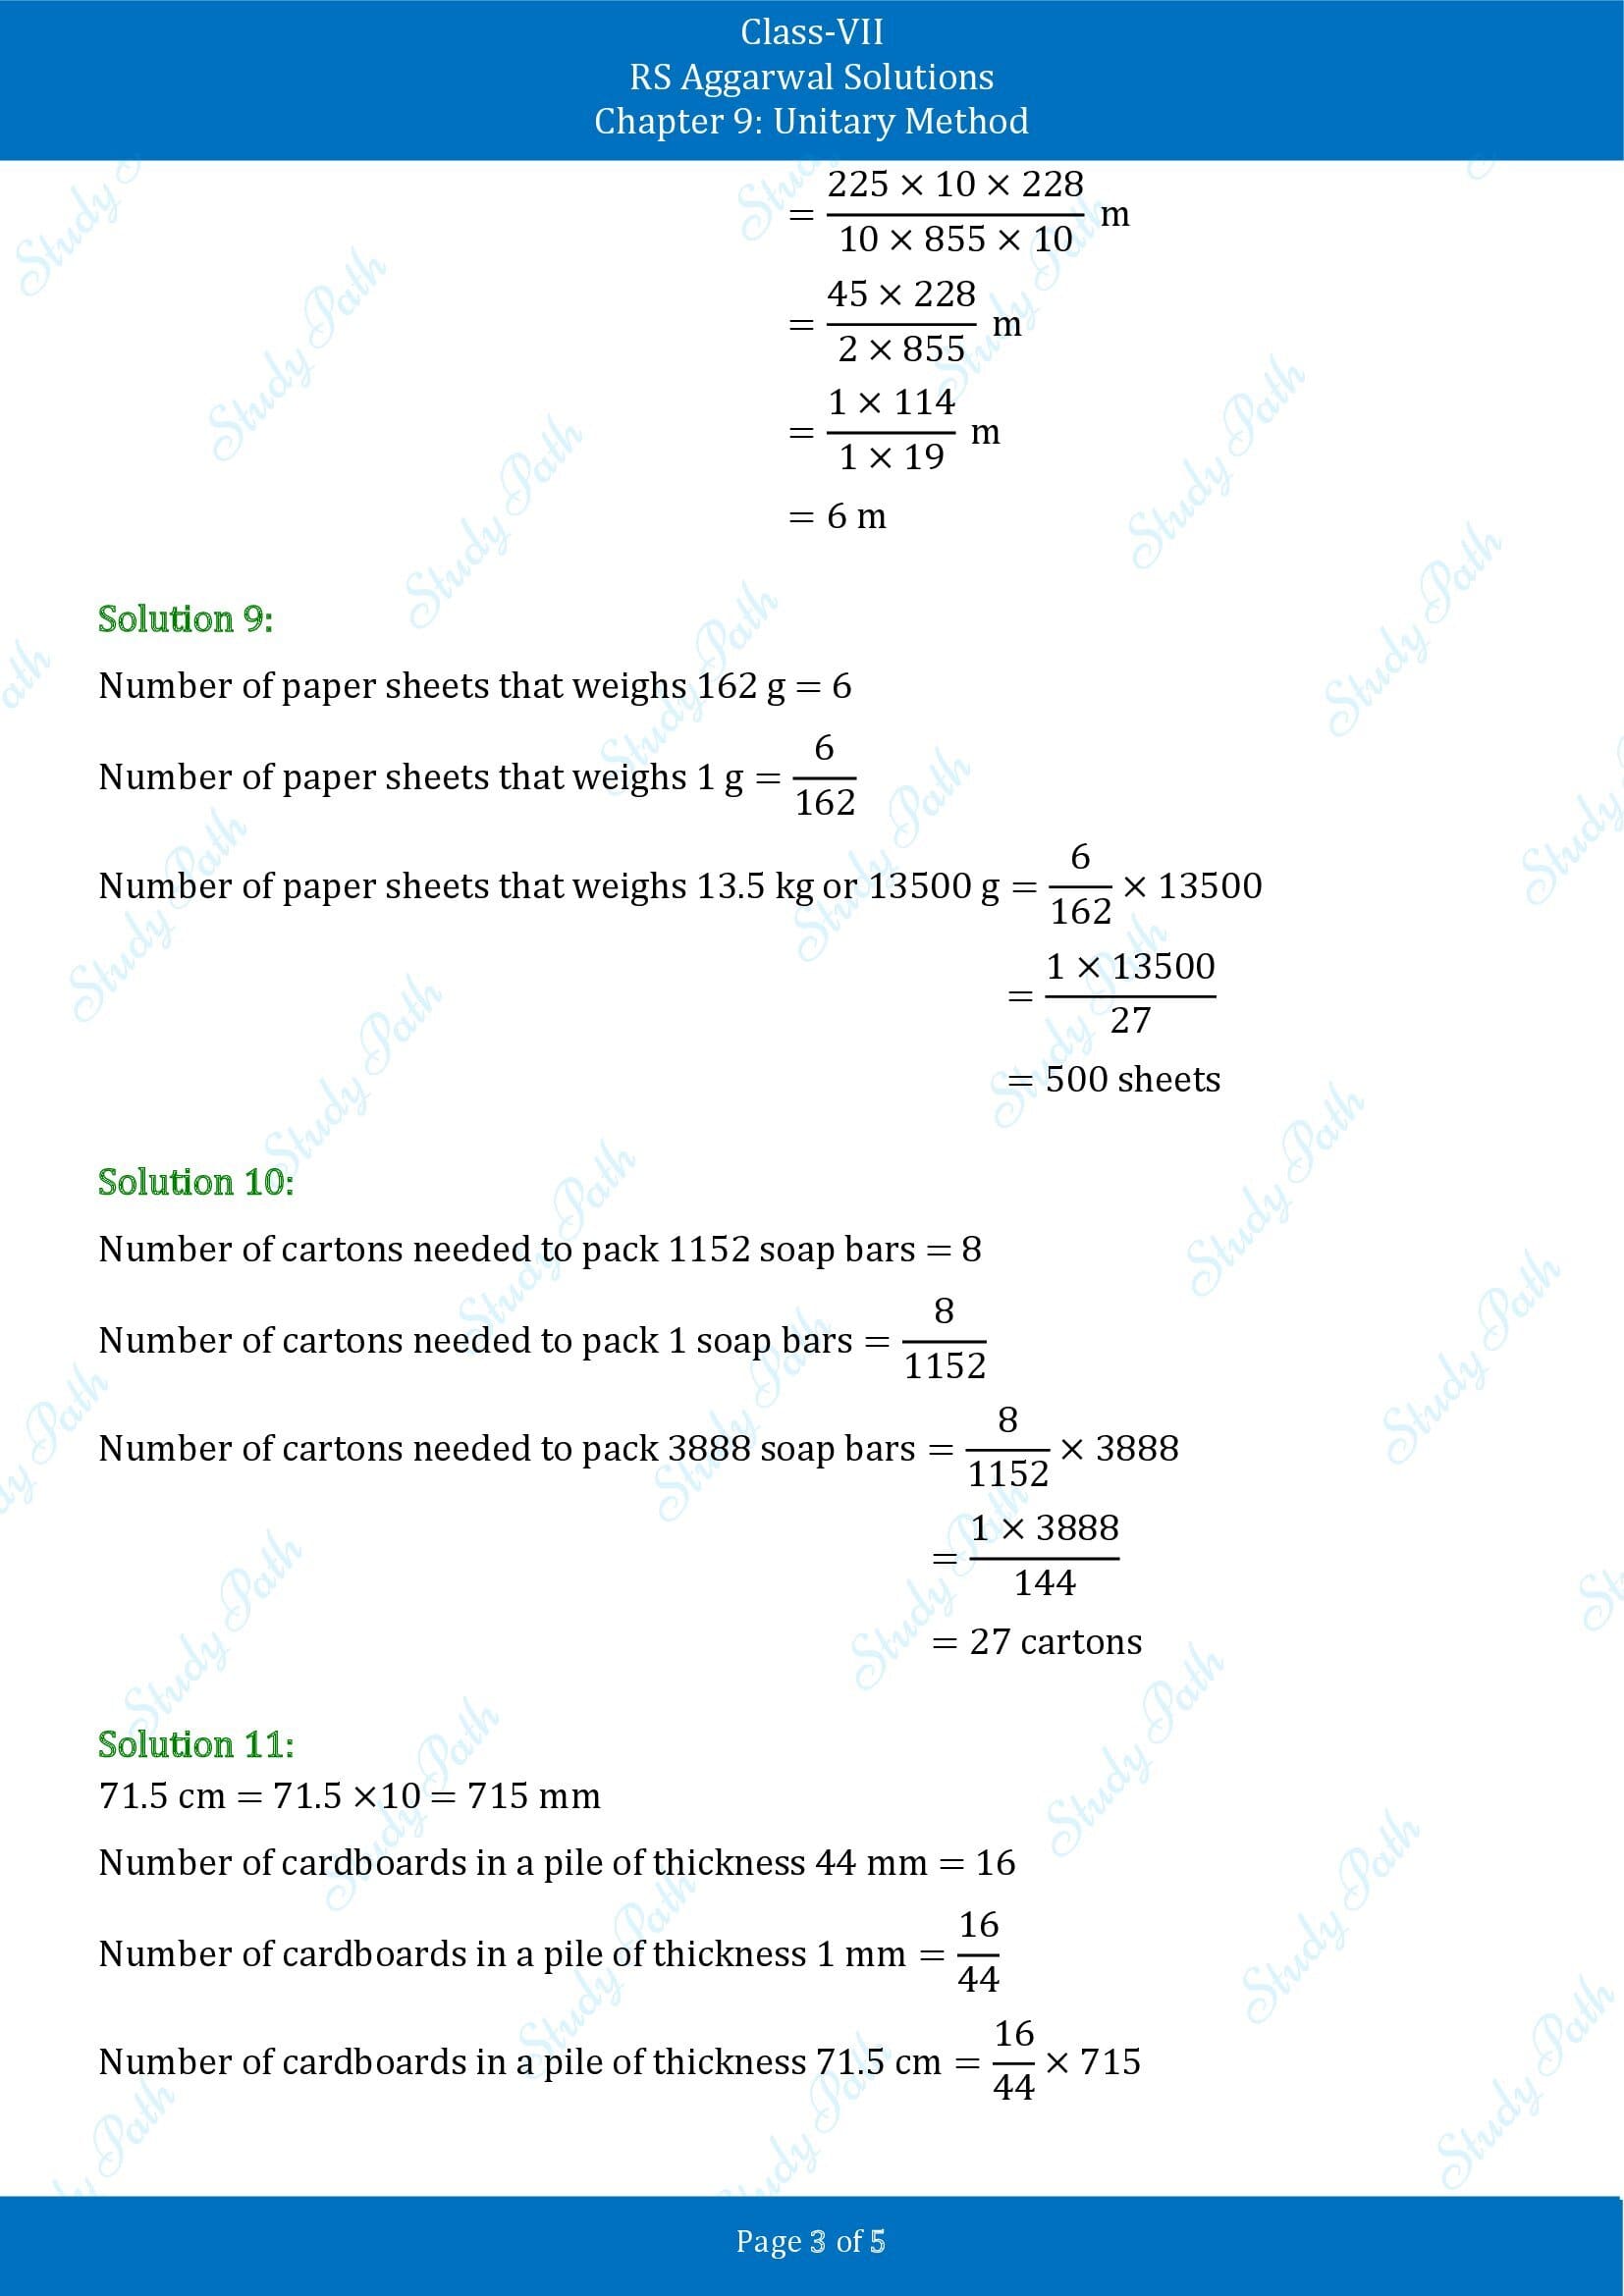 RS Aggarwal Solutions Class 7 Chapter 9 Unitary Method Exercise 9A 00003